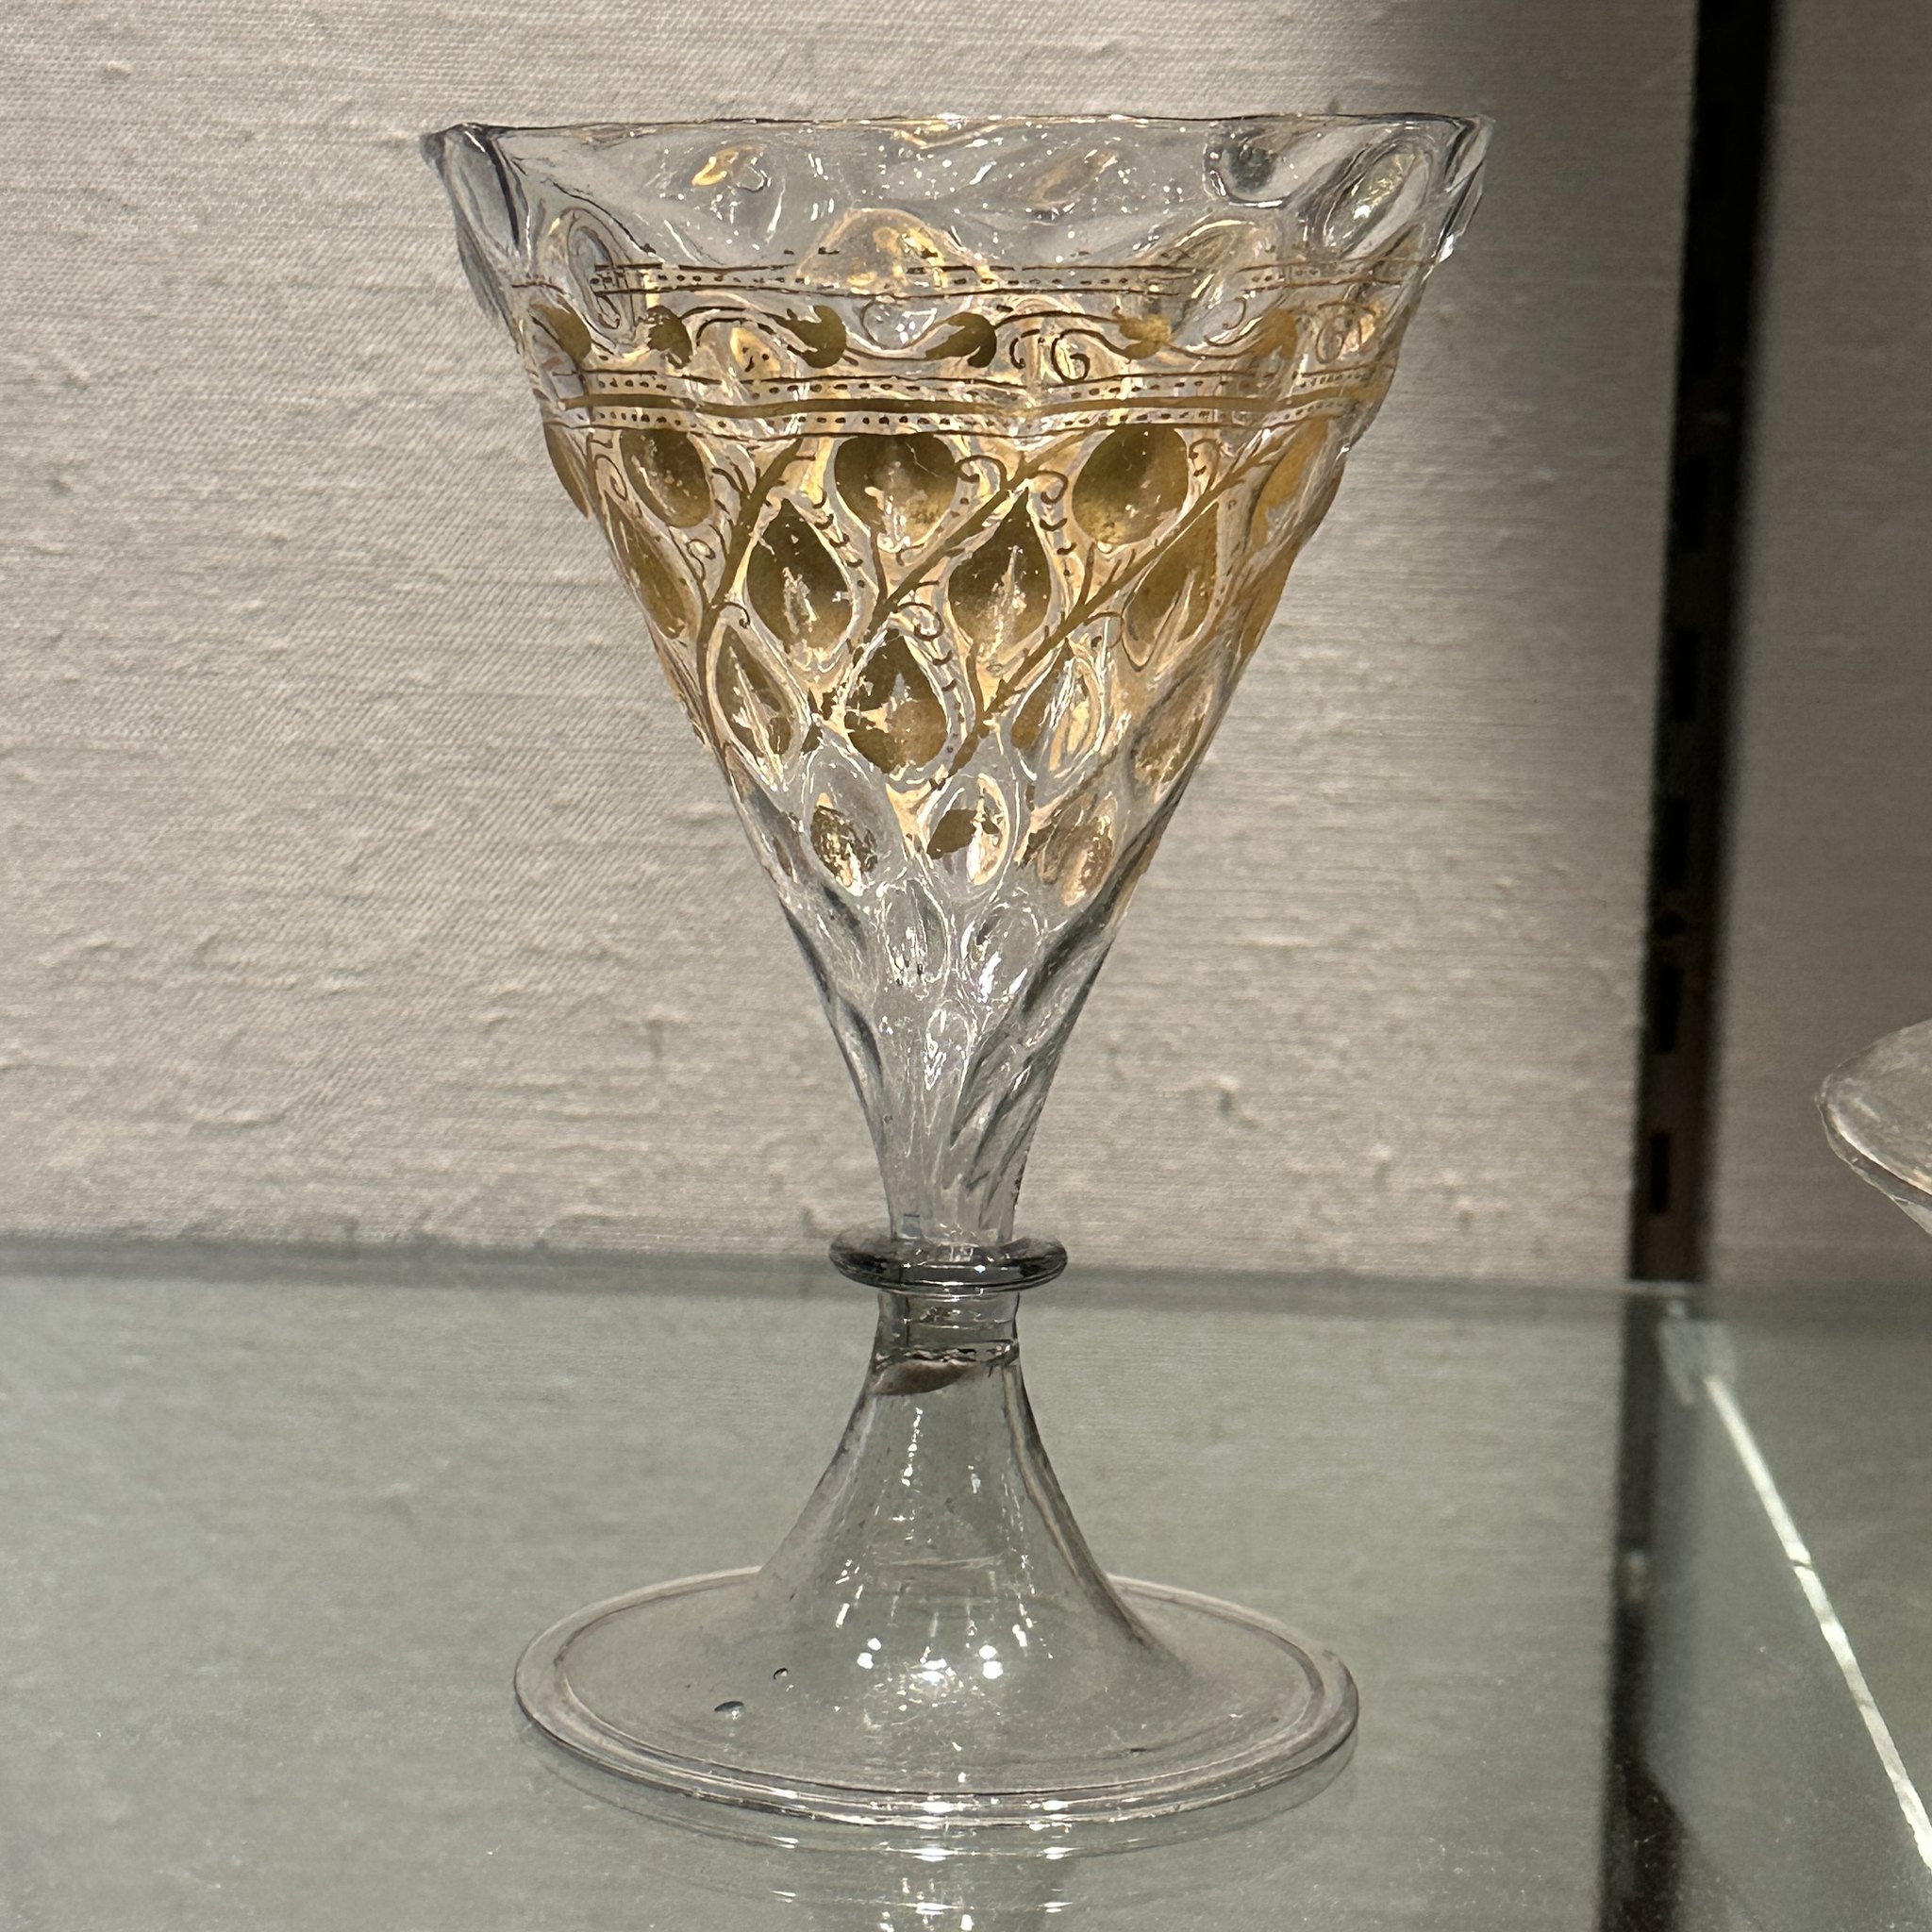 From the Corning Museum Of Glass